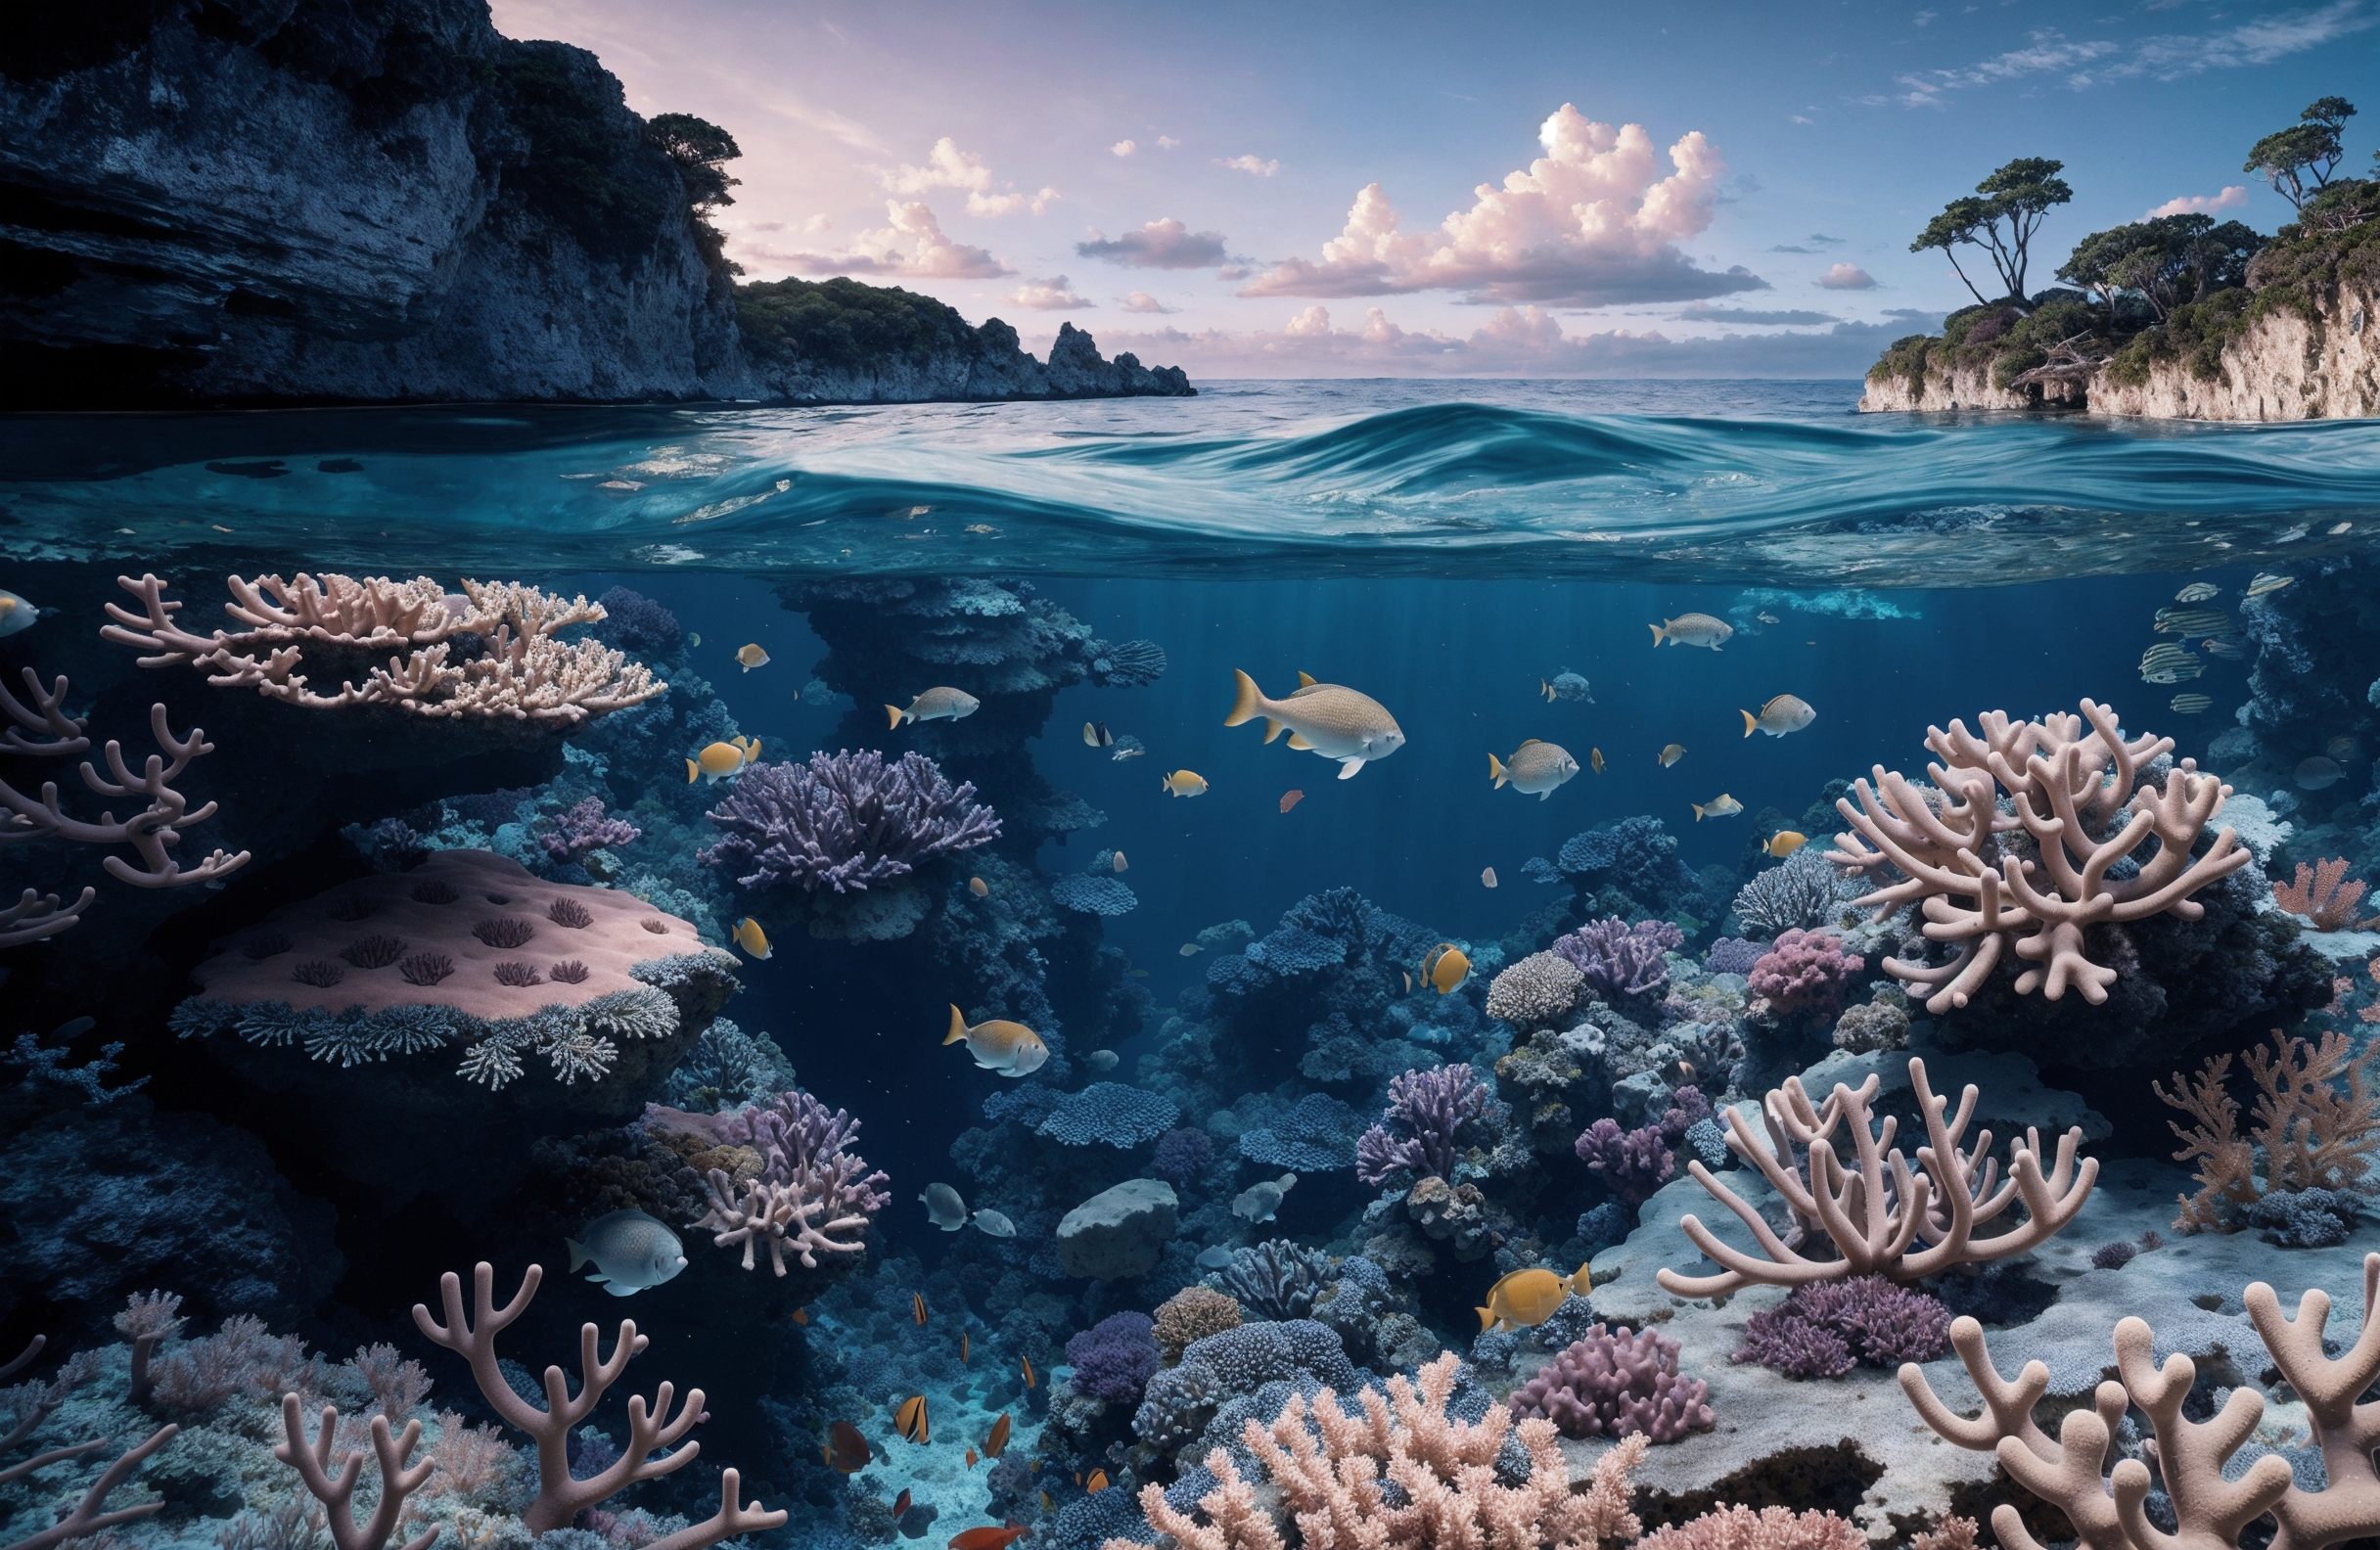 A vibrant coral reef in the ocean with diverse marine life.